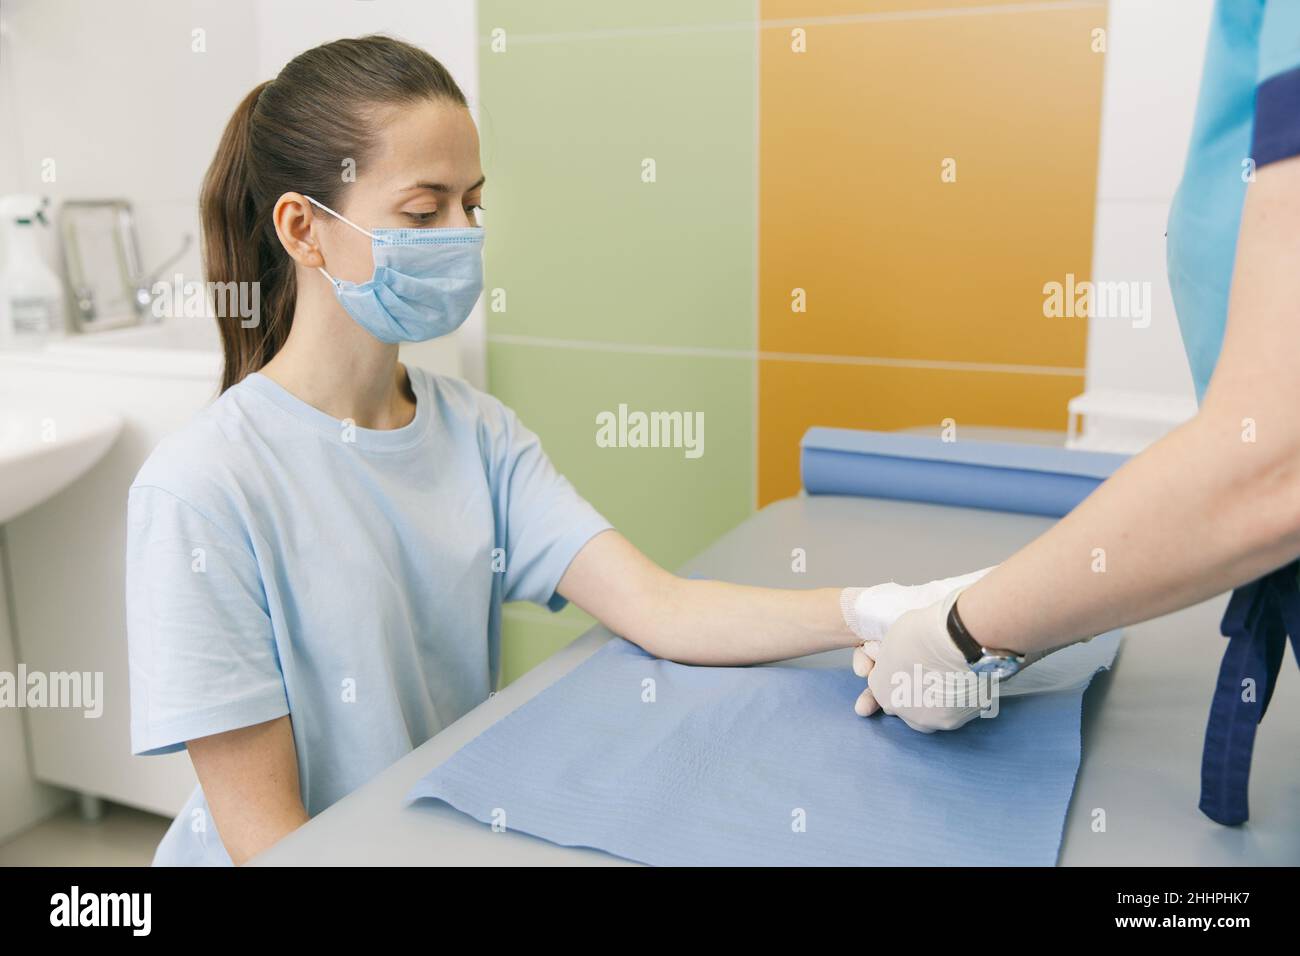 A doctor wrapped around the wrist for first aid close-up. Application of bandages on the patient's hands, first aid concepts and wrist injury Stock Photo